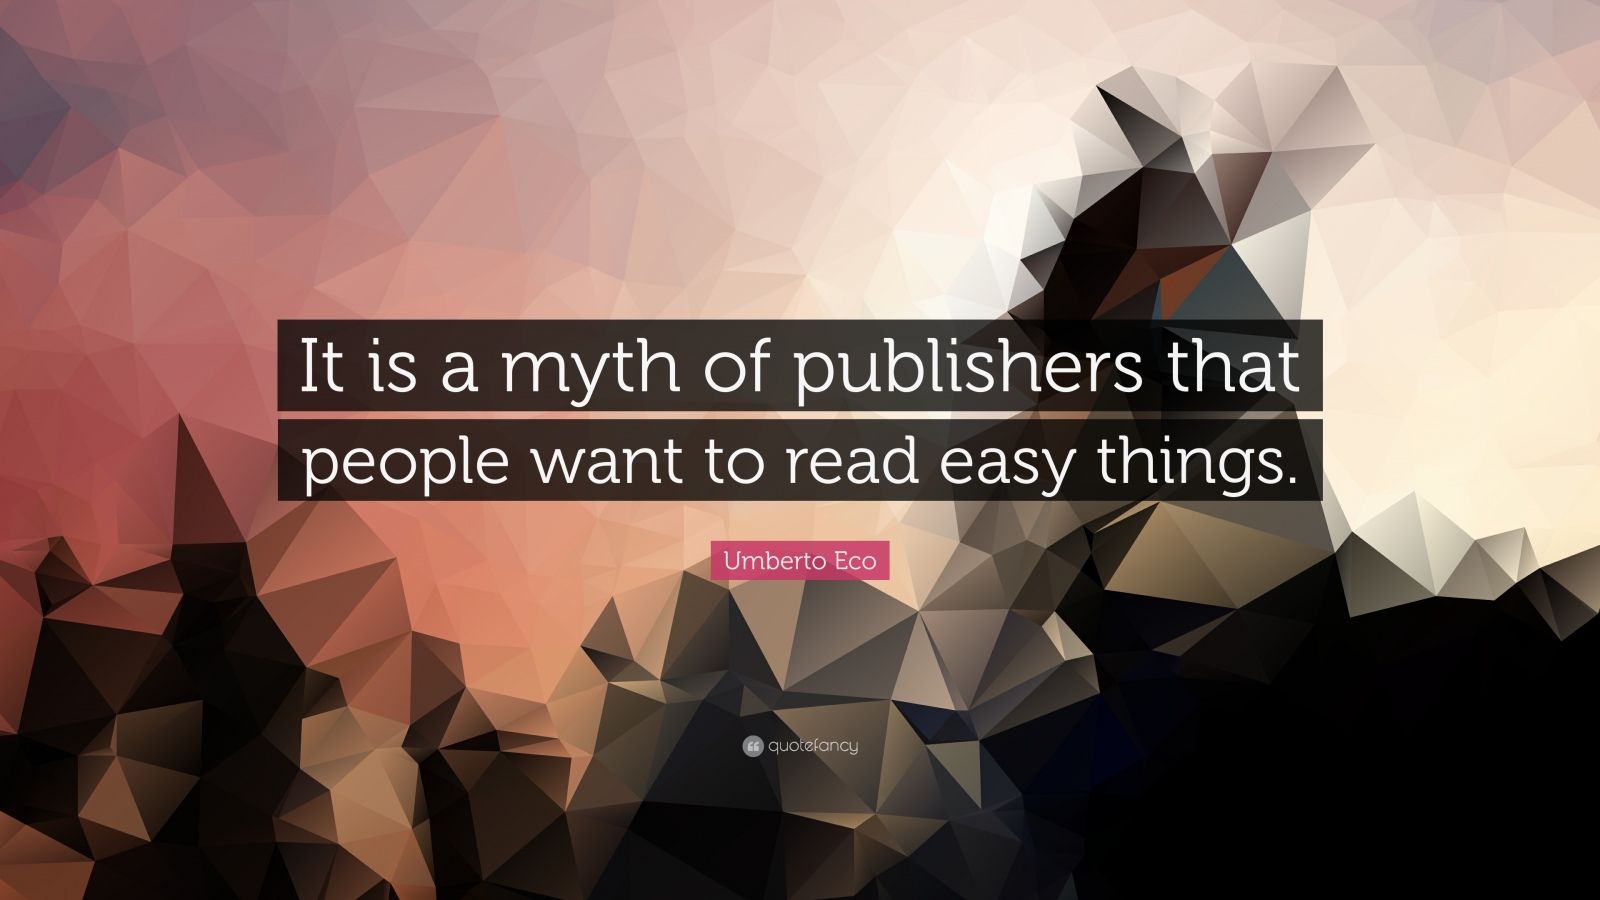 Umberto Eco Quote “It is a myth of publishers that people want to read